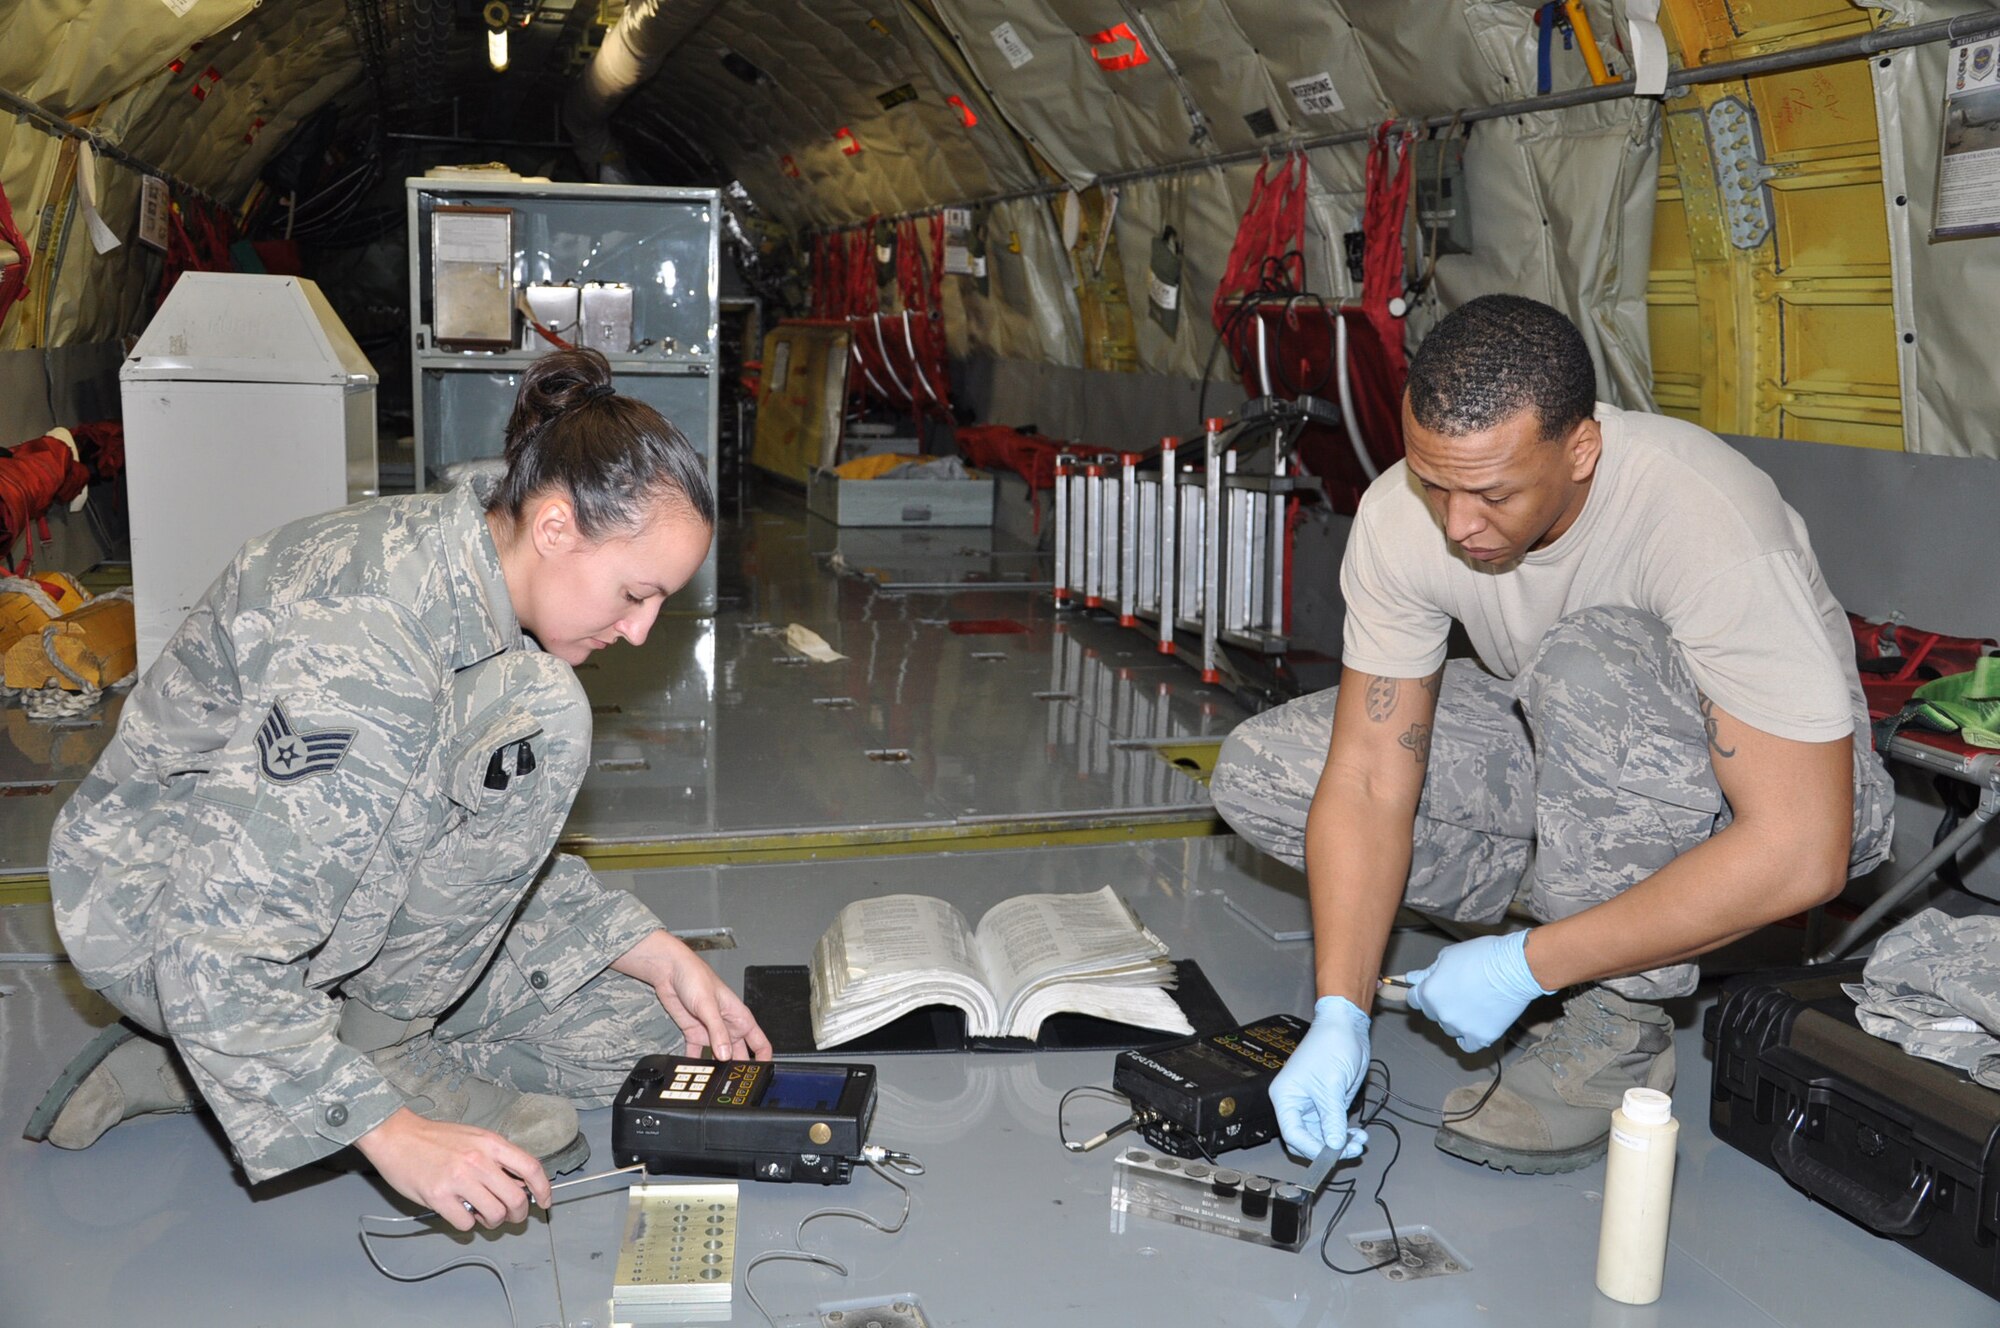 Staff Sgt. Amanda Mitchell, 931st Maintenance Squadron, calibrates an eddy current probe prior to inspecting a KC-135 Stratotanker's bulkhead for cracks while Staff Sgt. Bryan Tyler, 22nd Maintenance Squadron, calibrates an ultrasonic transducer prior to testing for subsurface defects. (Air Force photo by Tech. Sgt. Brannen Parrish)